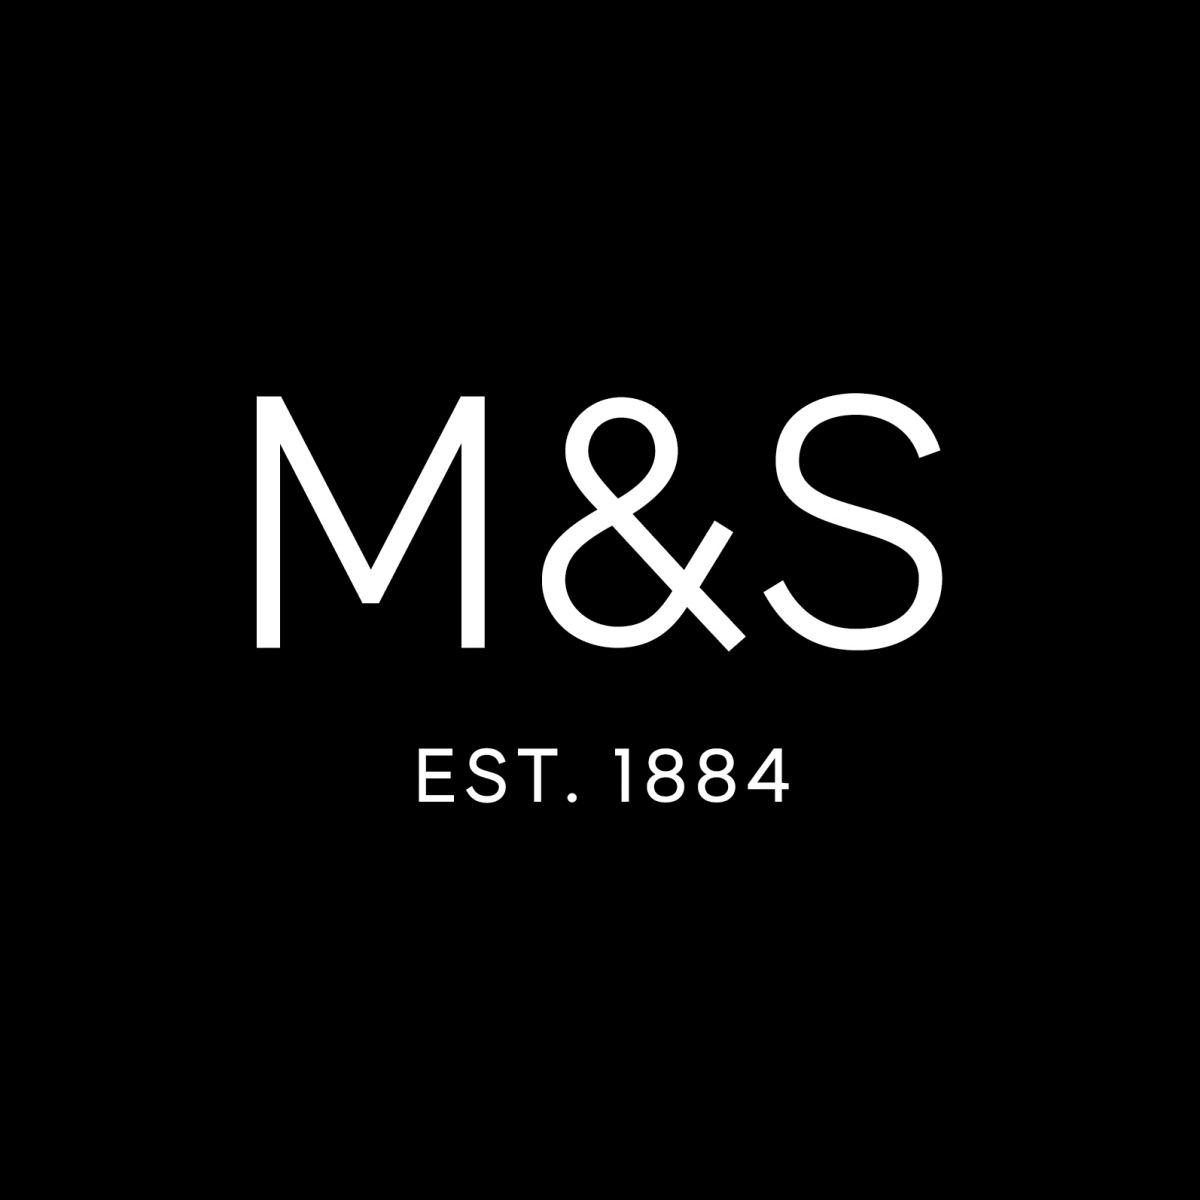 M&S is a business member of Anaphylaxis UK